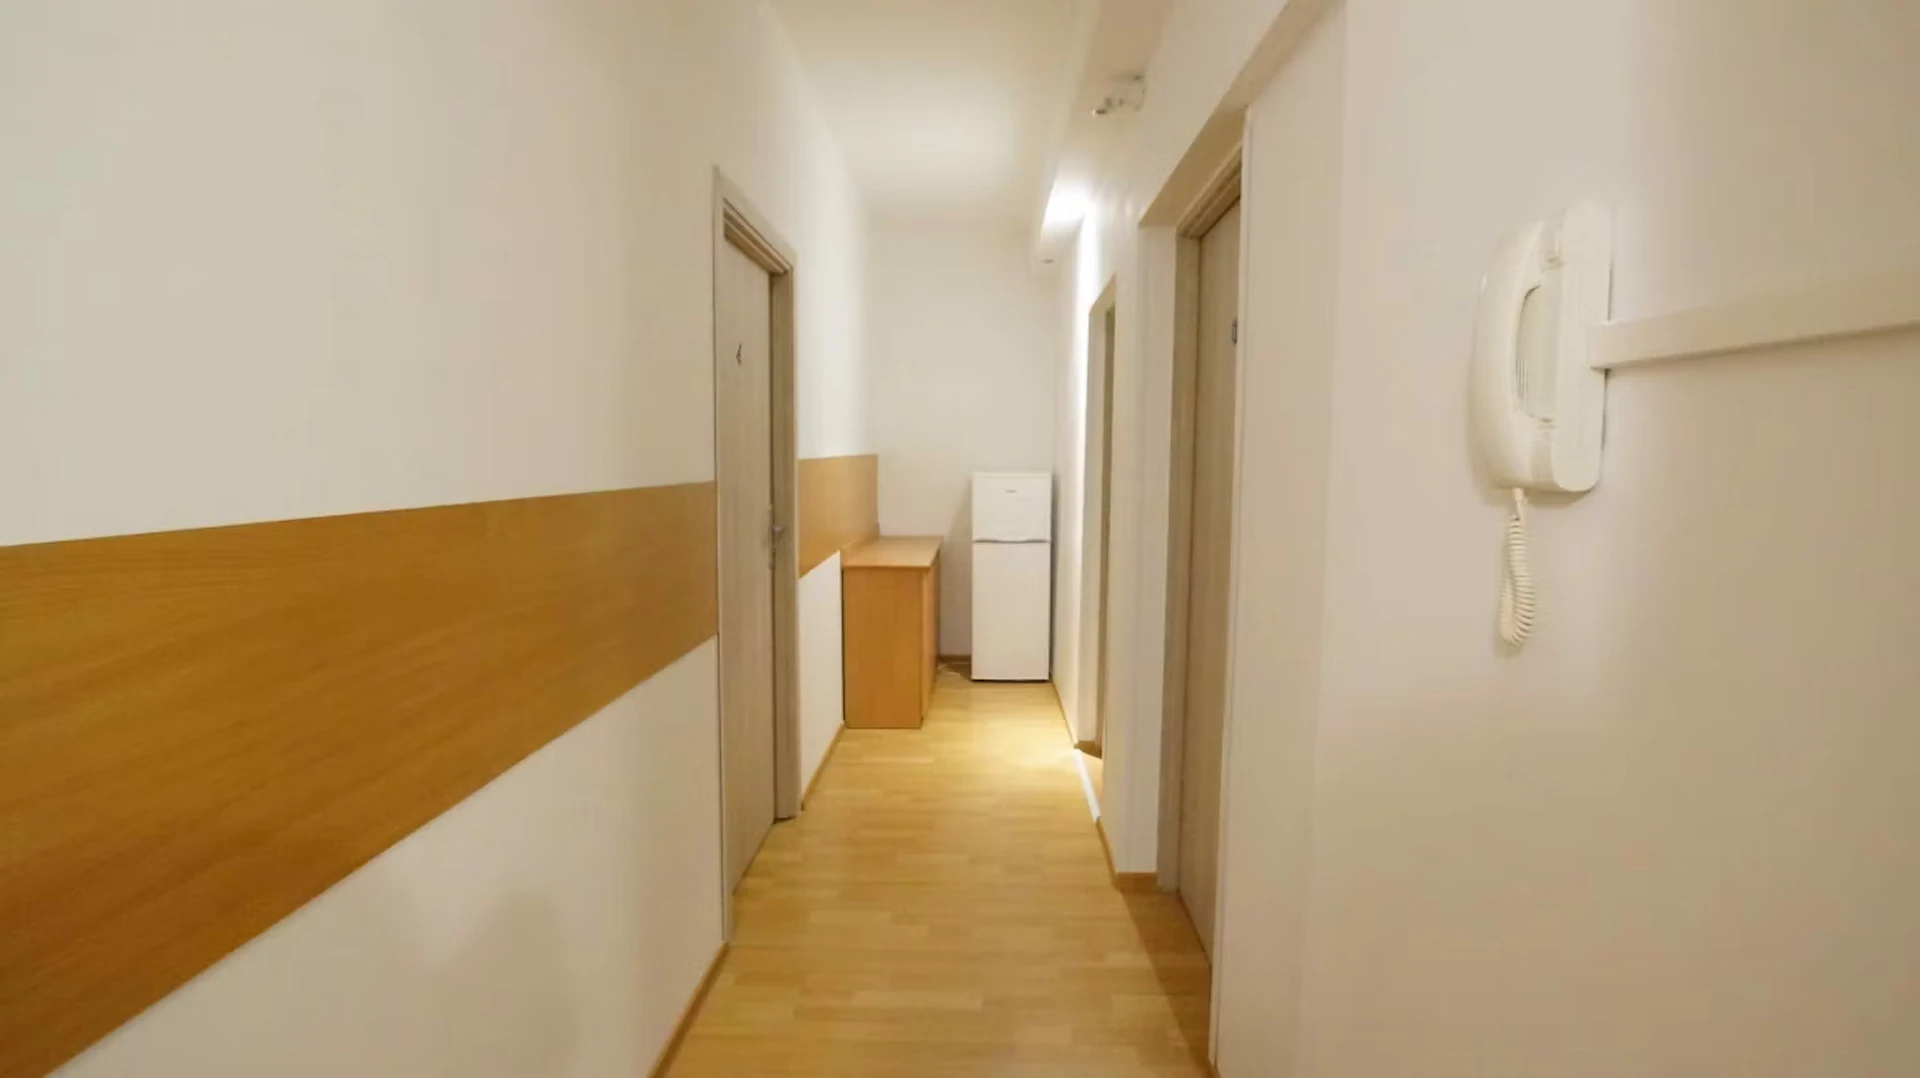 Room for rent in a shared flat in Lodz